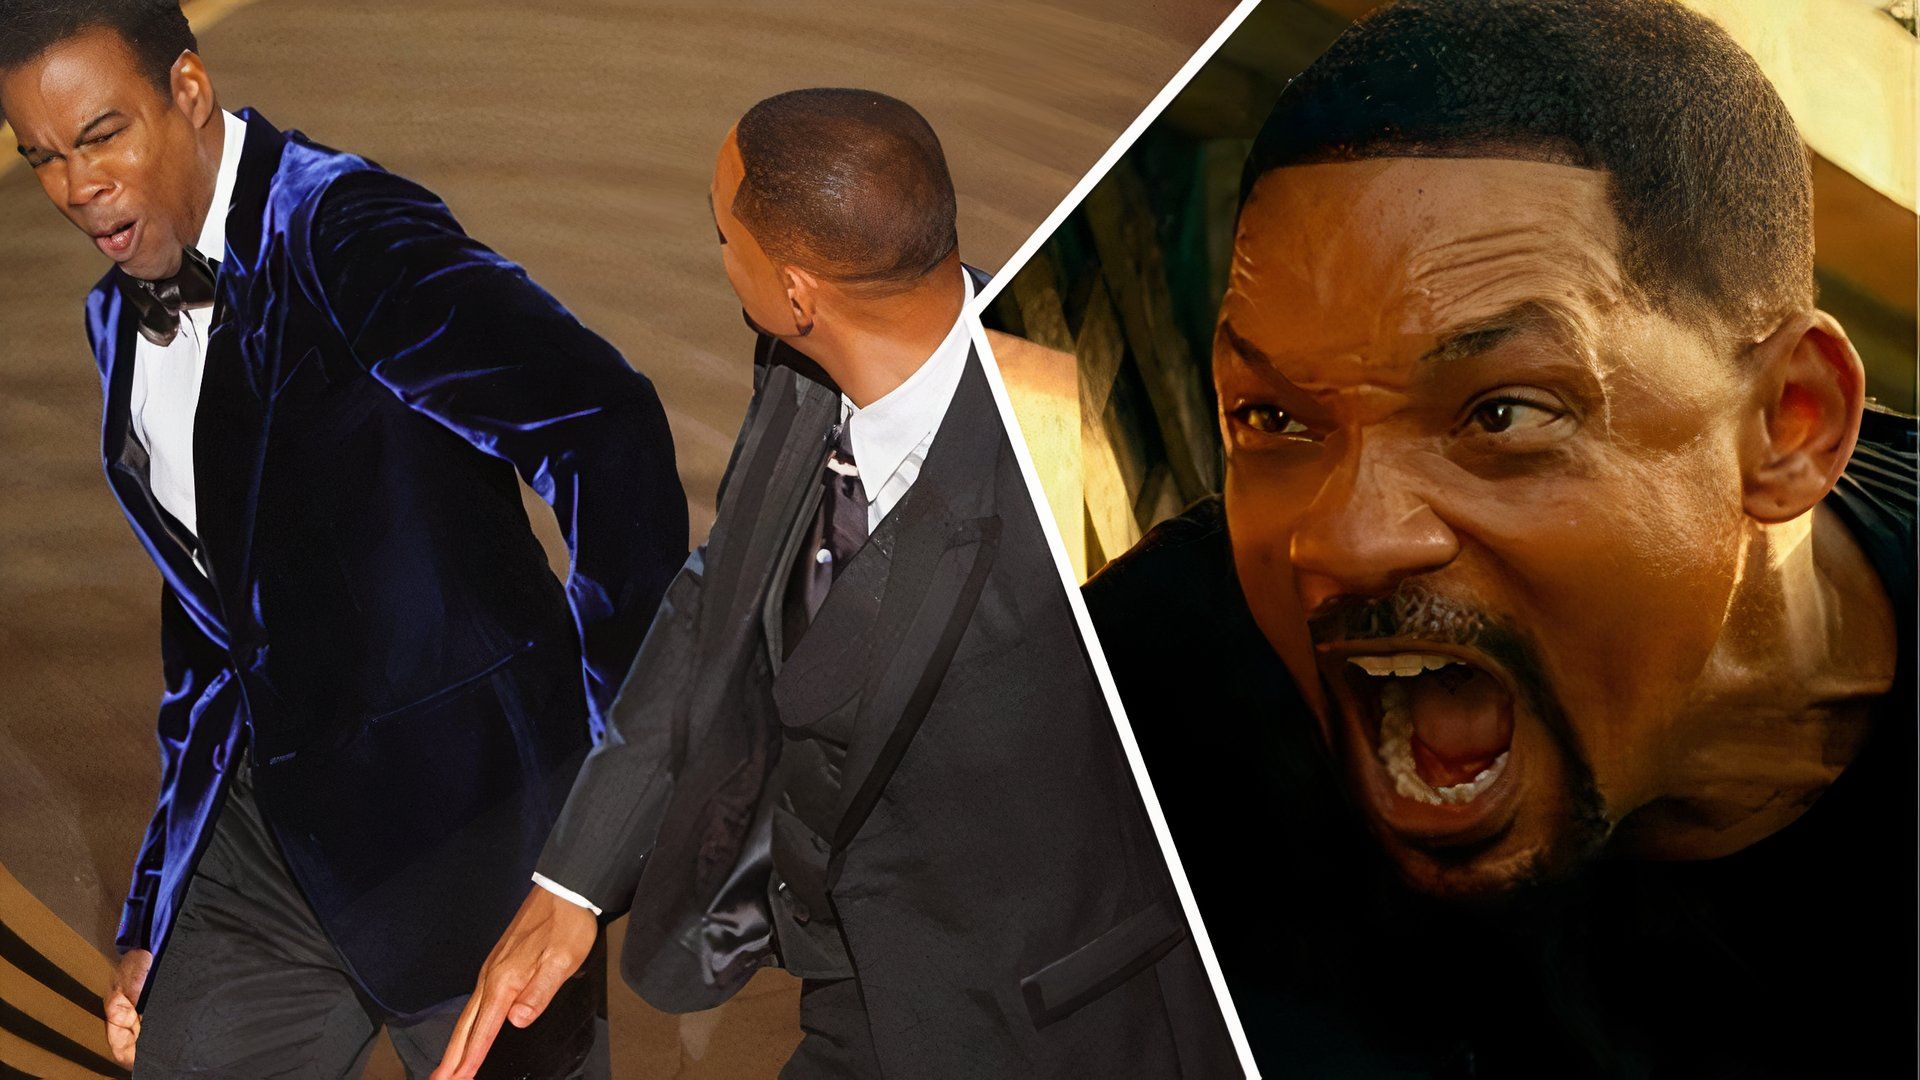 The Oscars slap and Will Smith shouting in Bad Boys: Ride or Die.